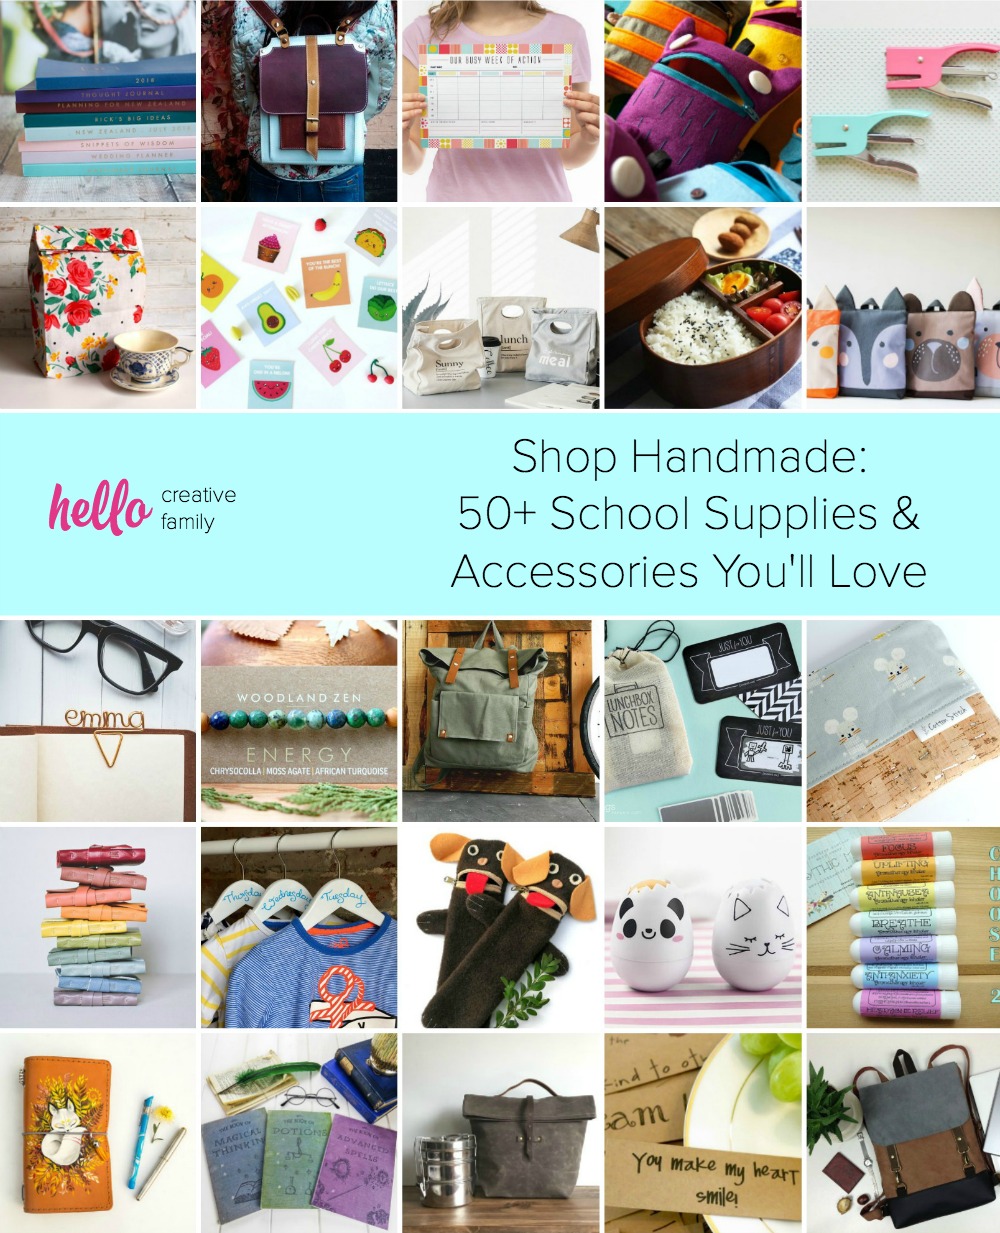 From backpacks, lunch bags and pencil pouches to pencils, family organization and kids anxiety tools, we've shopped Etsy to find 50 of the best handmade school supplies and accessories that your kids are sure to love! #handmade #backtoschool #Etsy #giftideas